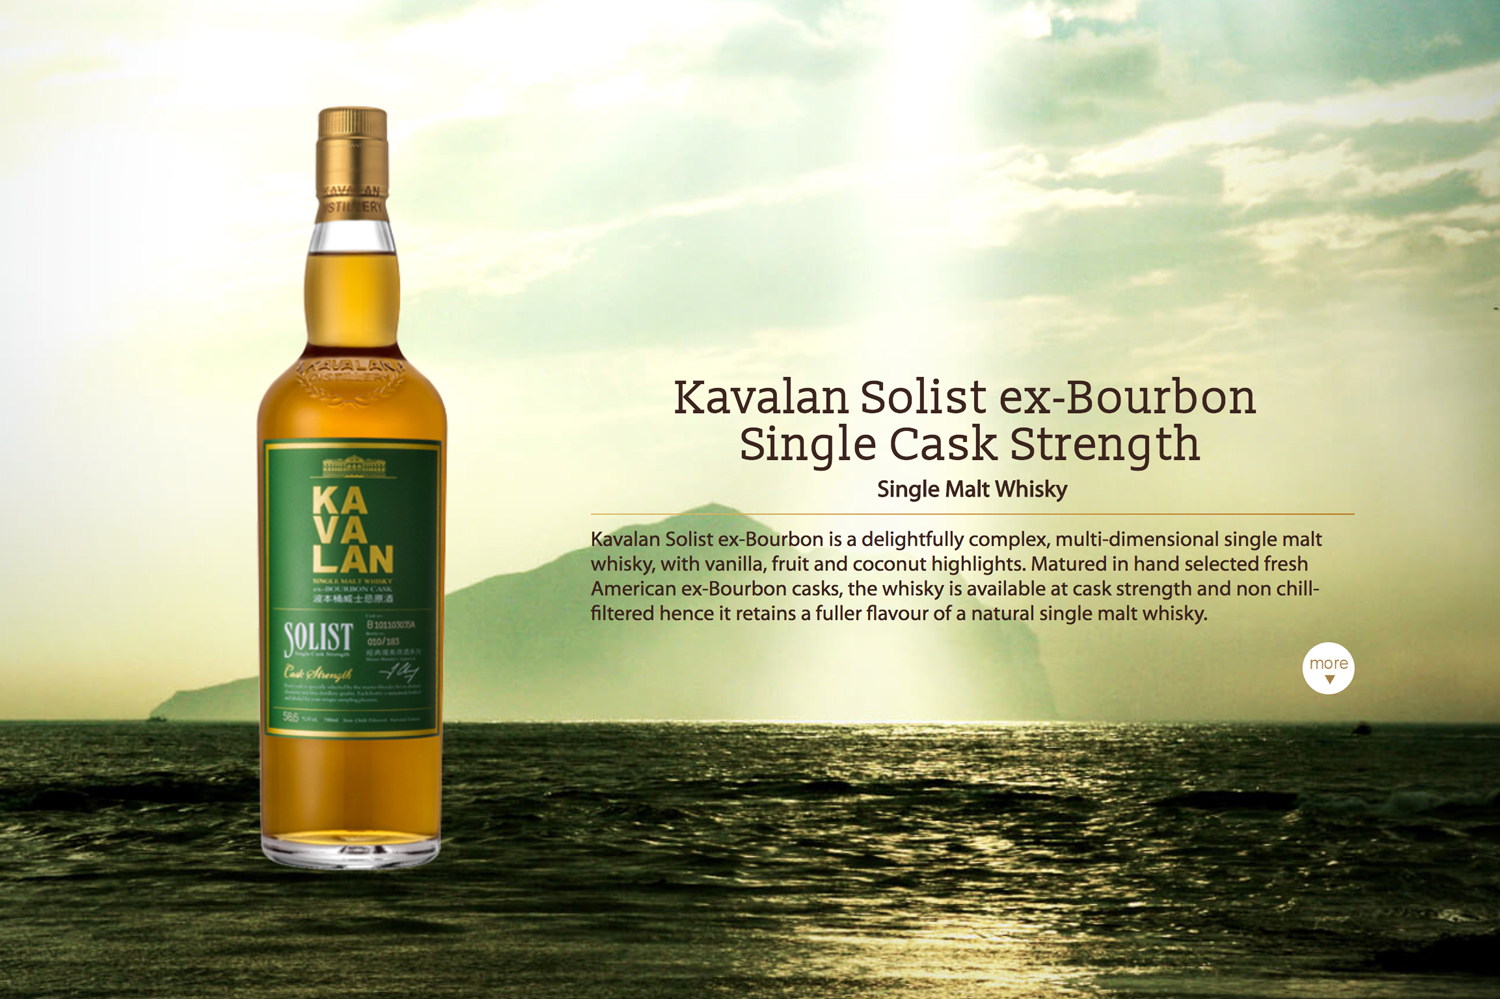 The Kavalan Solist ex-Bourbon Single Cask was also the Gold medal winners this year.